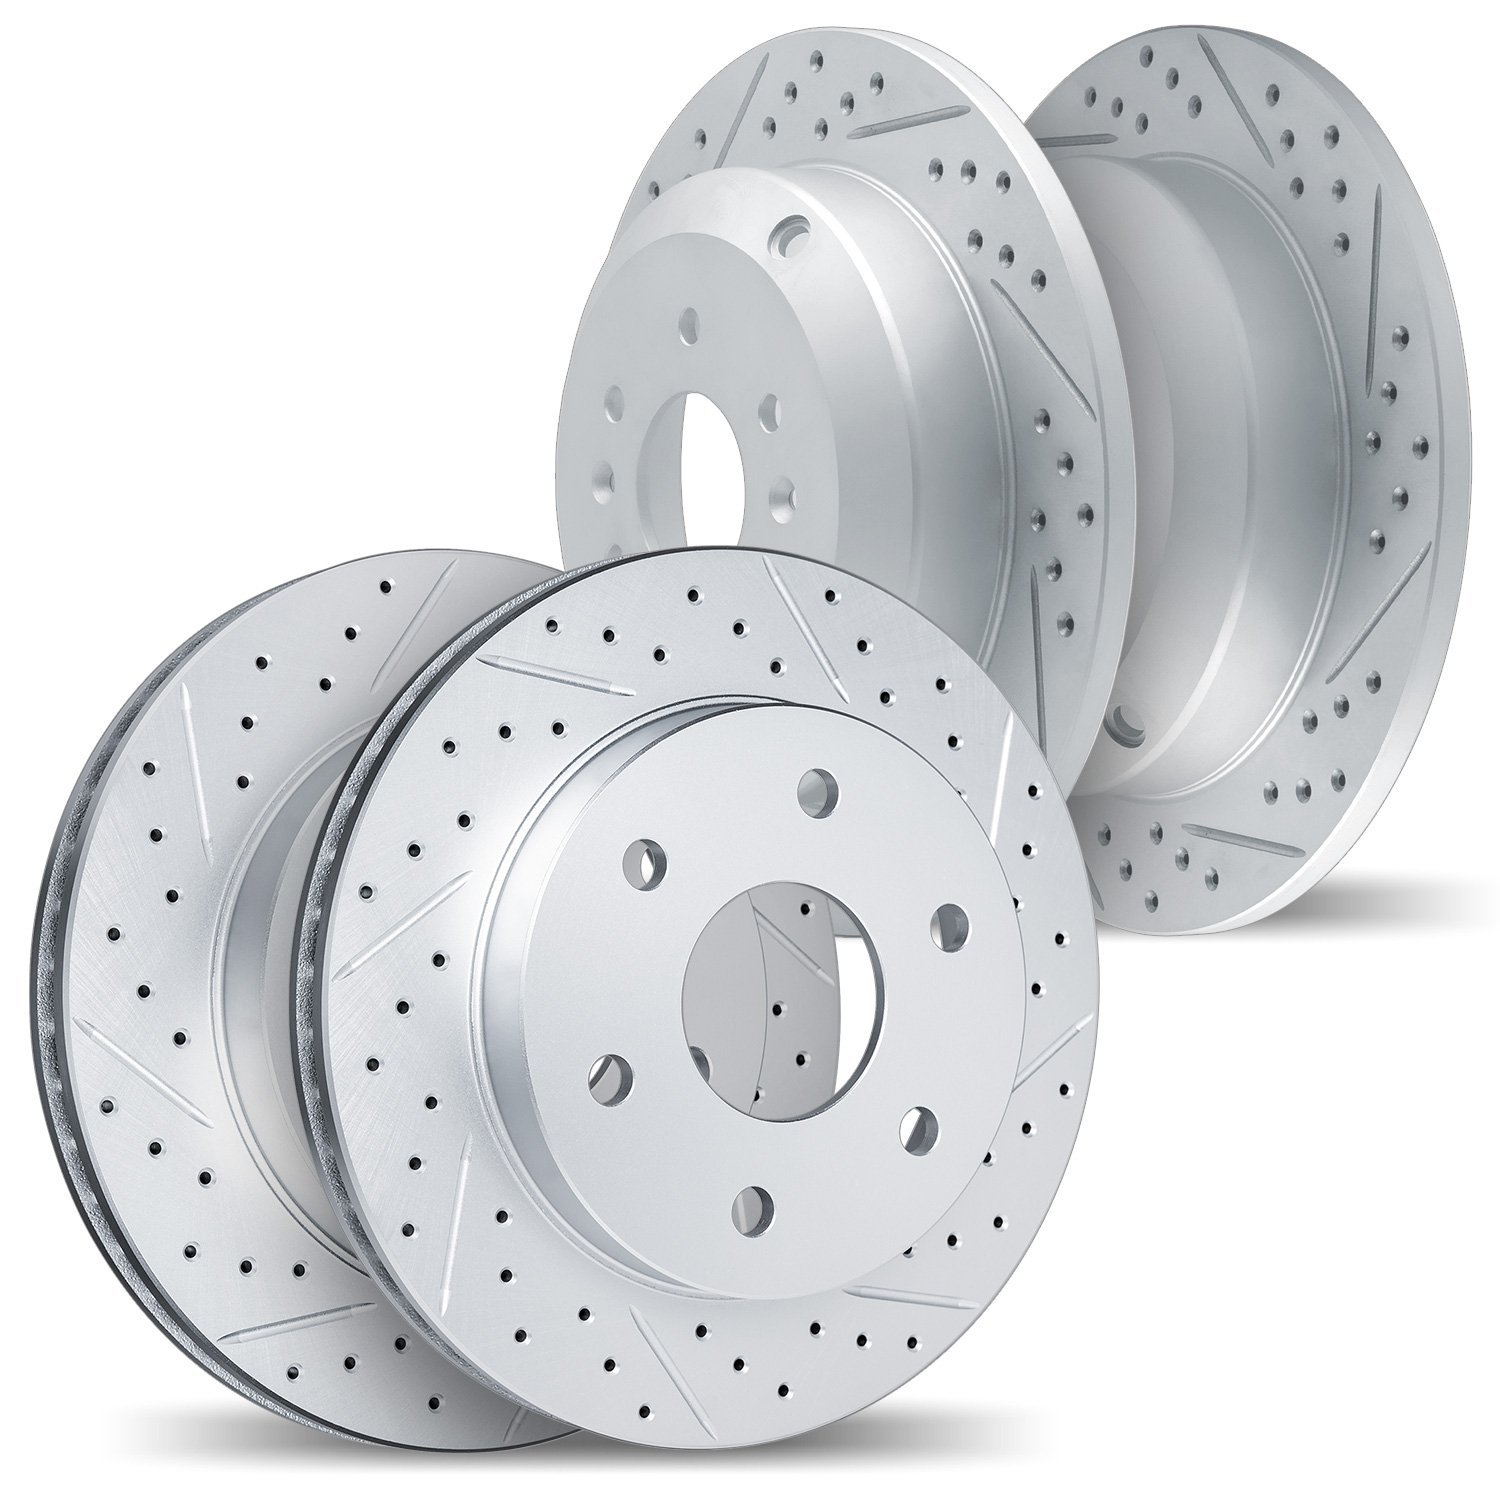 2004-67017 Geoperformance Drilled/Slotted Brake Rotors, 2005-2007 Infiniti/Nissan, Position: Front and Rear